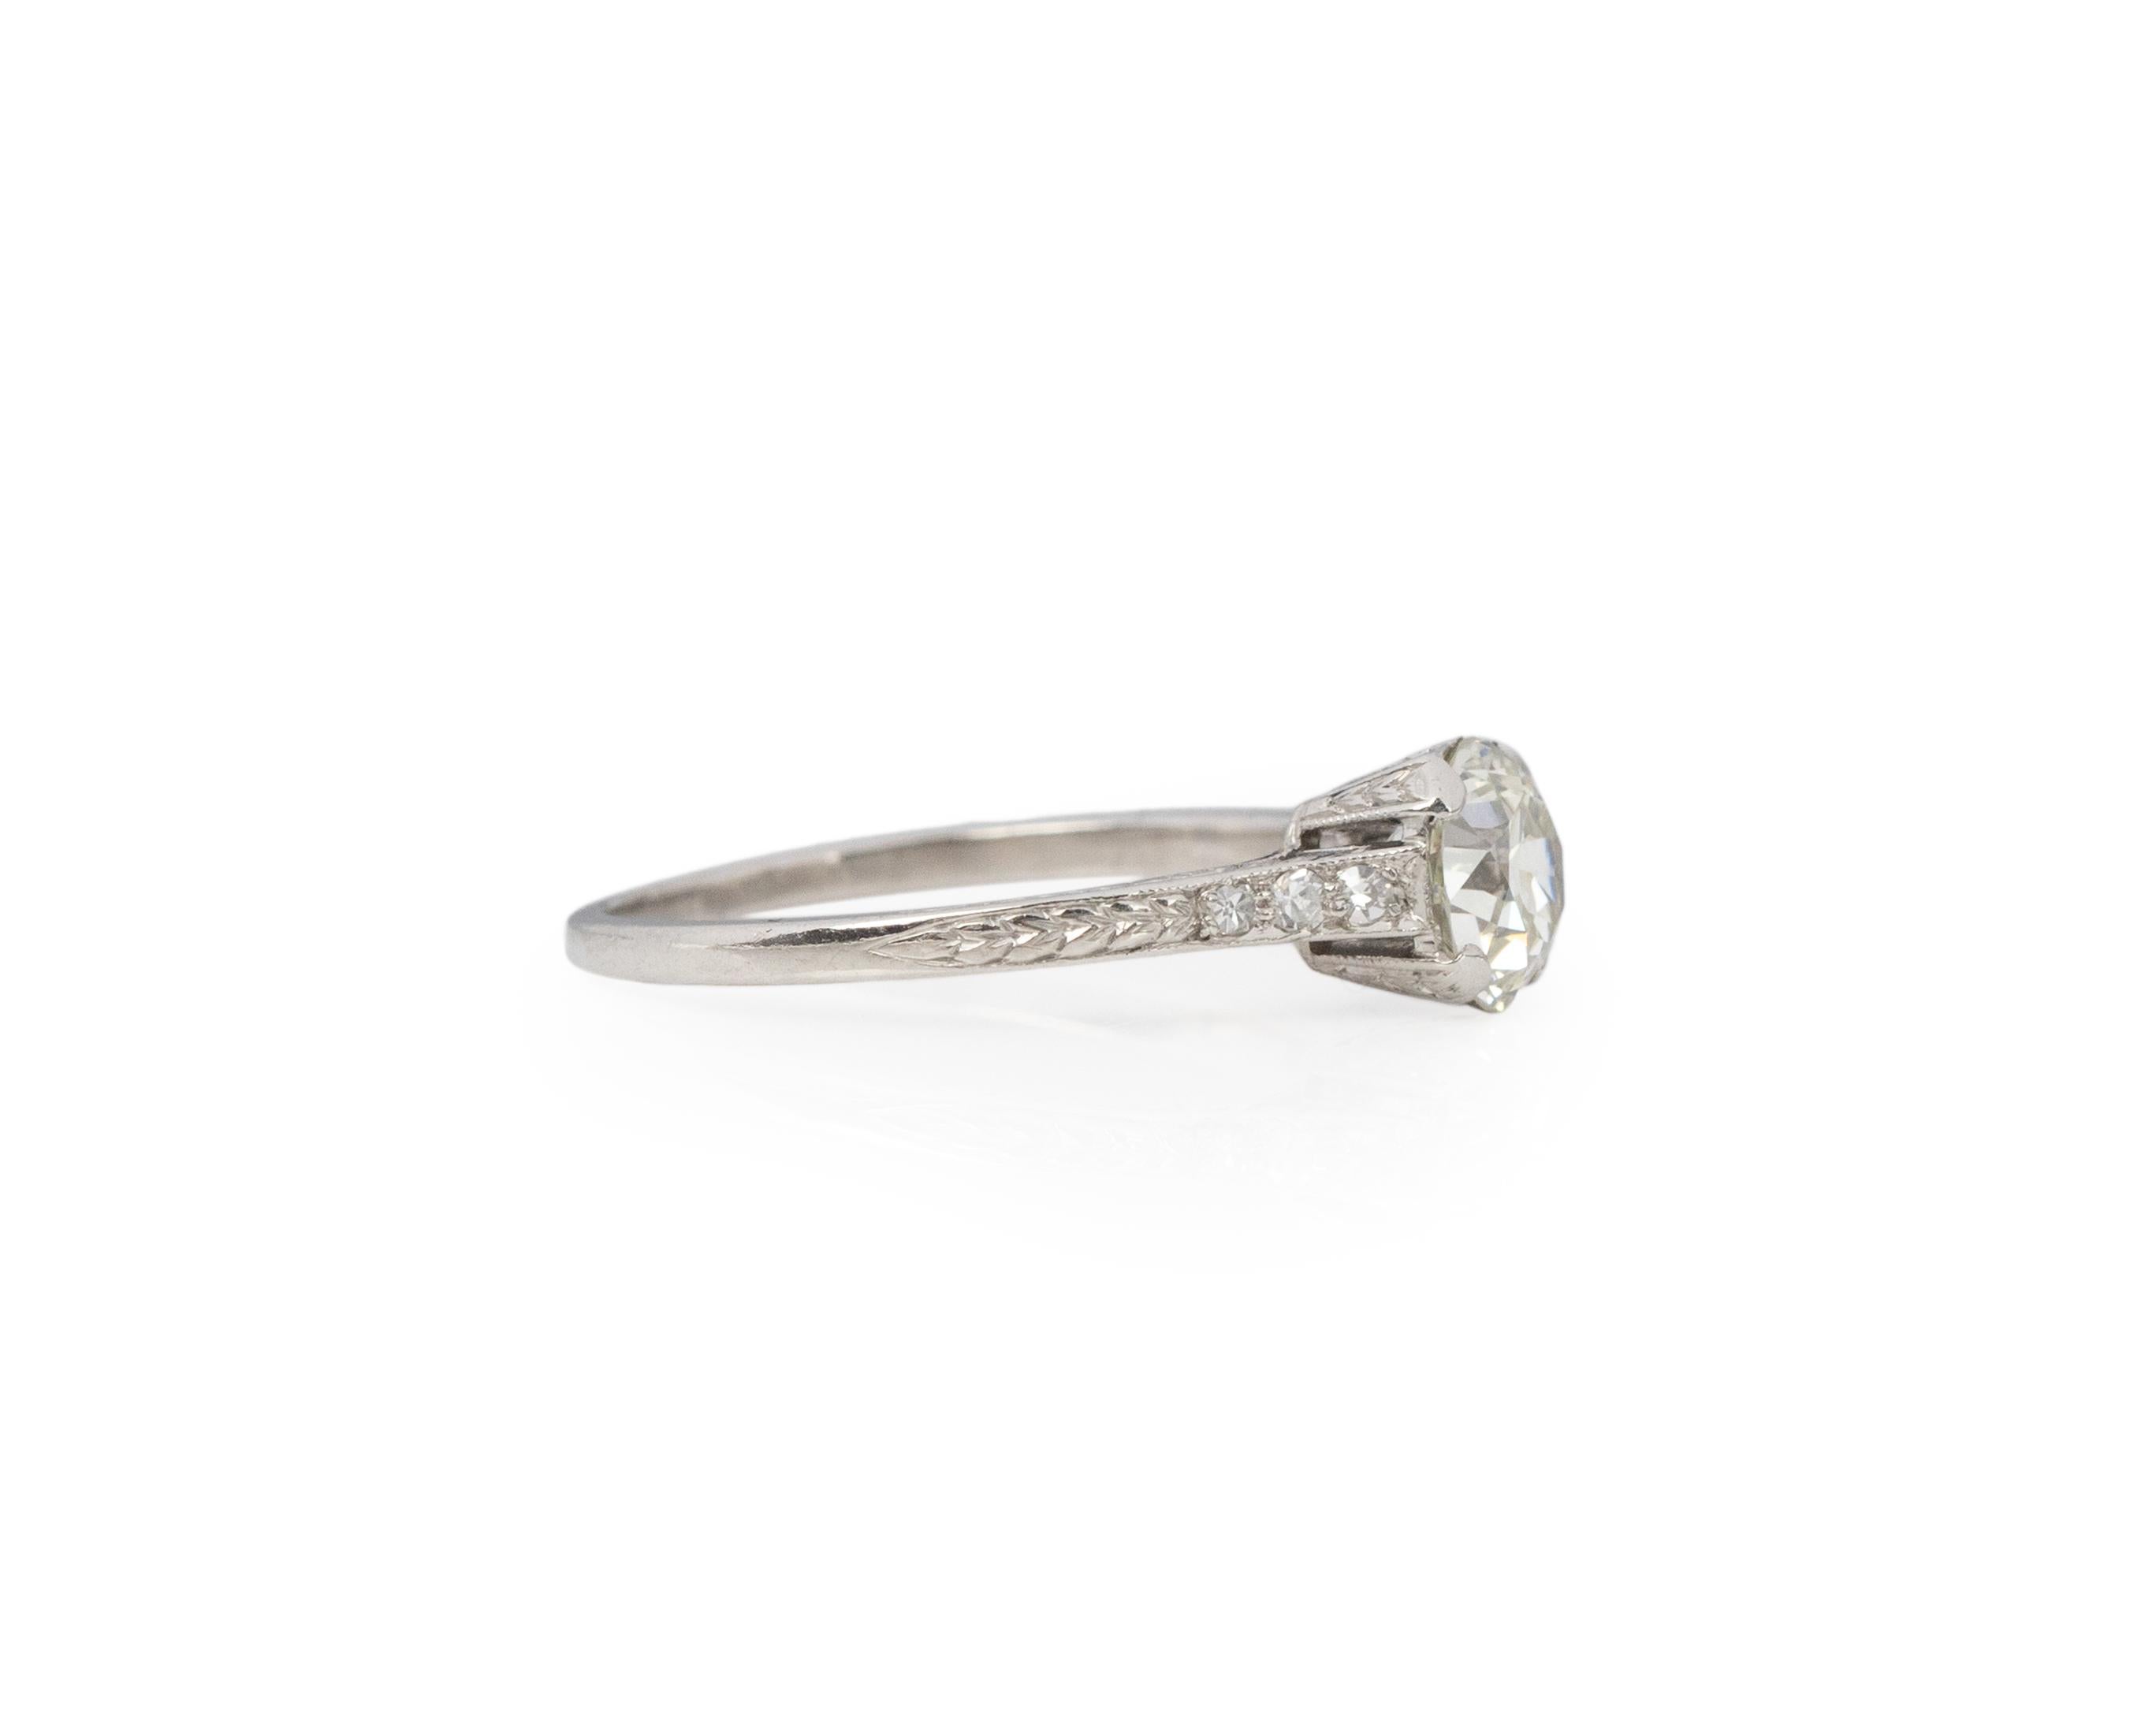 Ring Size:
Metal Type: Platinum [Hallmarked, and Tested]
Weight: grams

Center Diamond Details:
GIA LAB REPORT #:6224862556
Weight: 1.00ct
Cut: Old European brilliant
Color: K
Clarity: VS1
Measurements: 6.28mm x 6.16mm x 4.07mm

Side Diamond